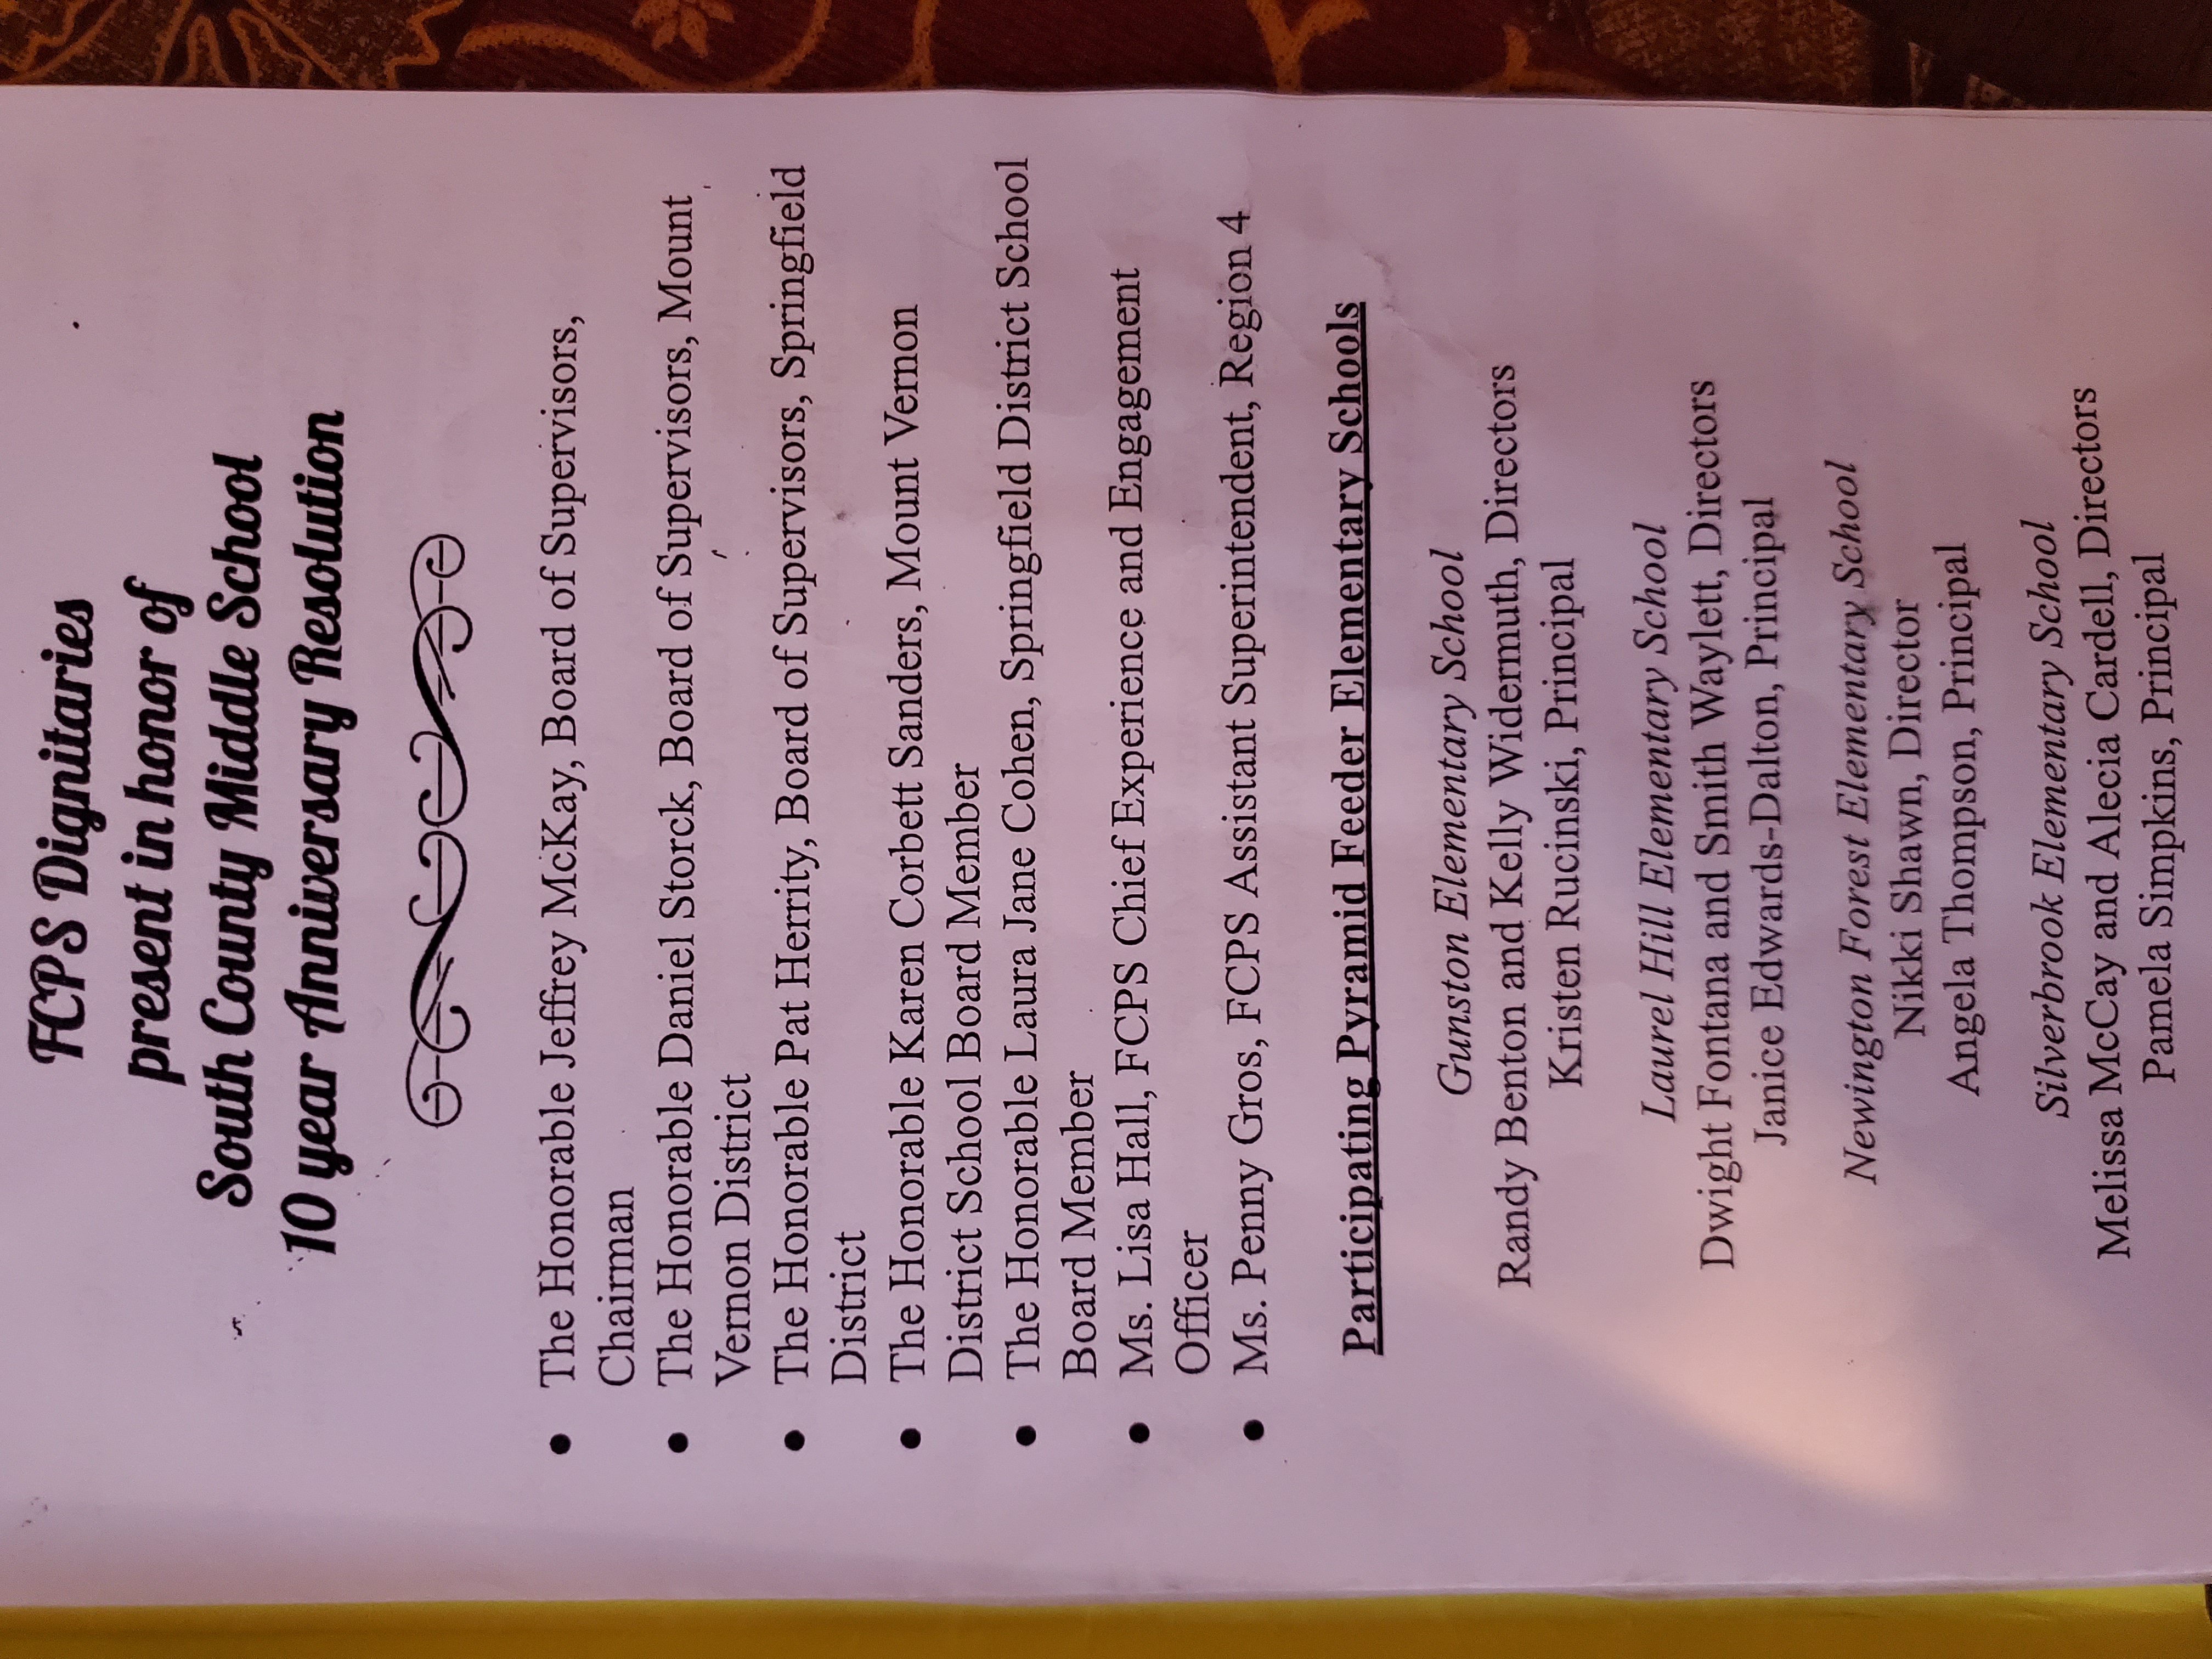 Program from the event includes school names and school board names